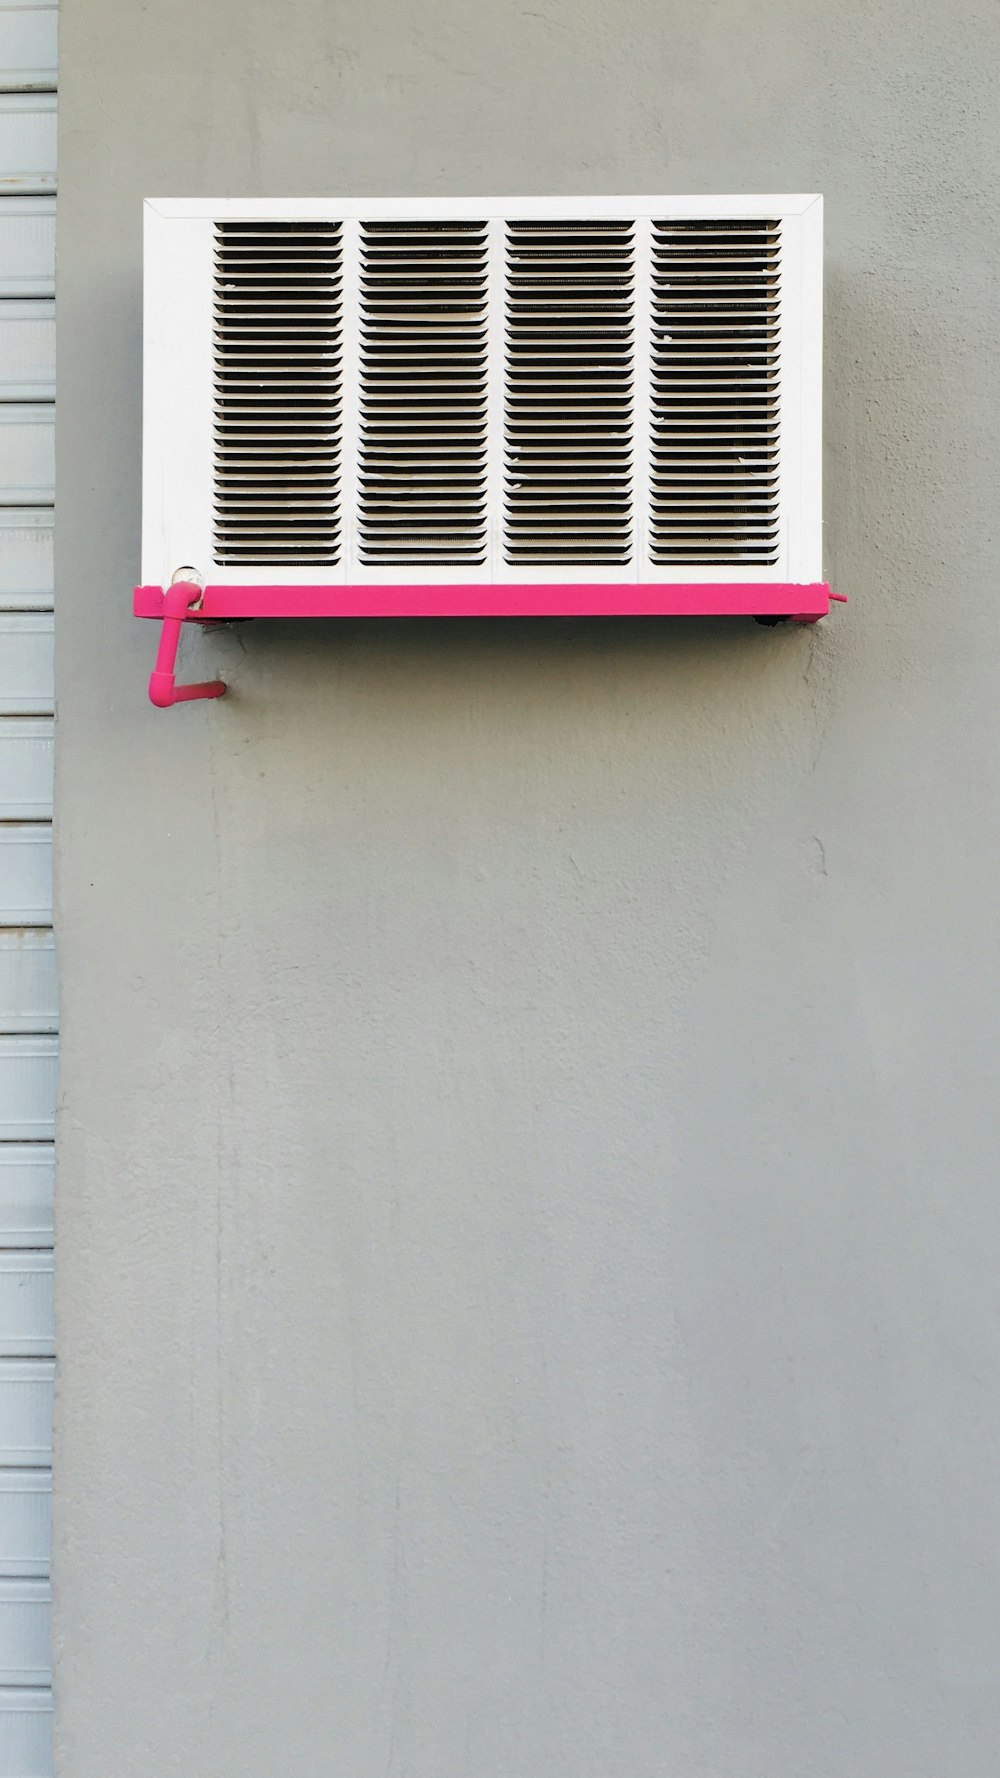 a vent on a wall